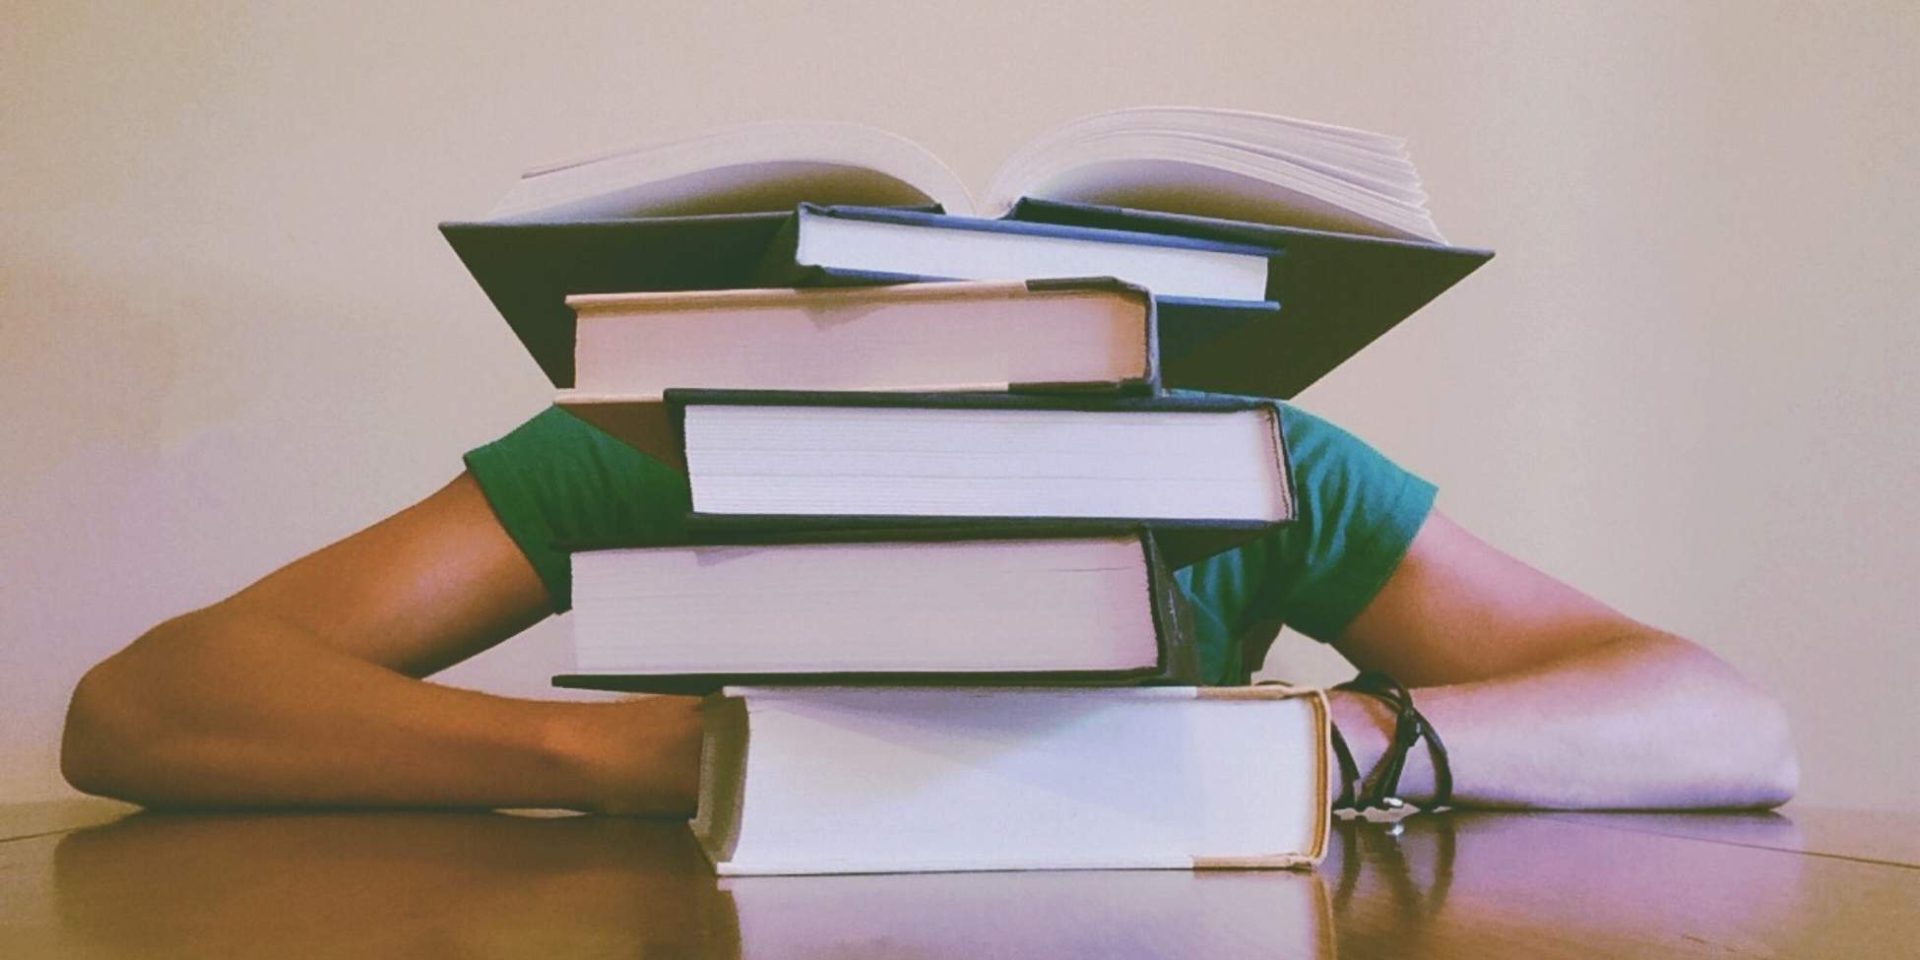 University student with head on hands behind a pile of books